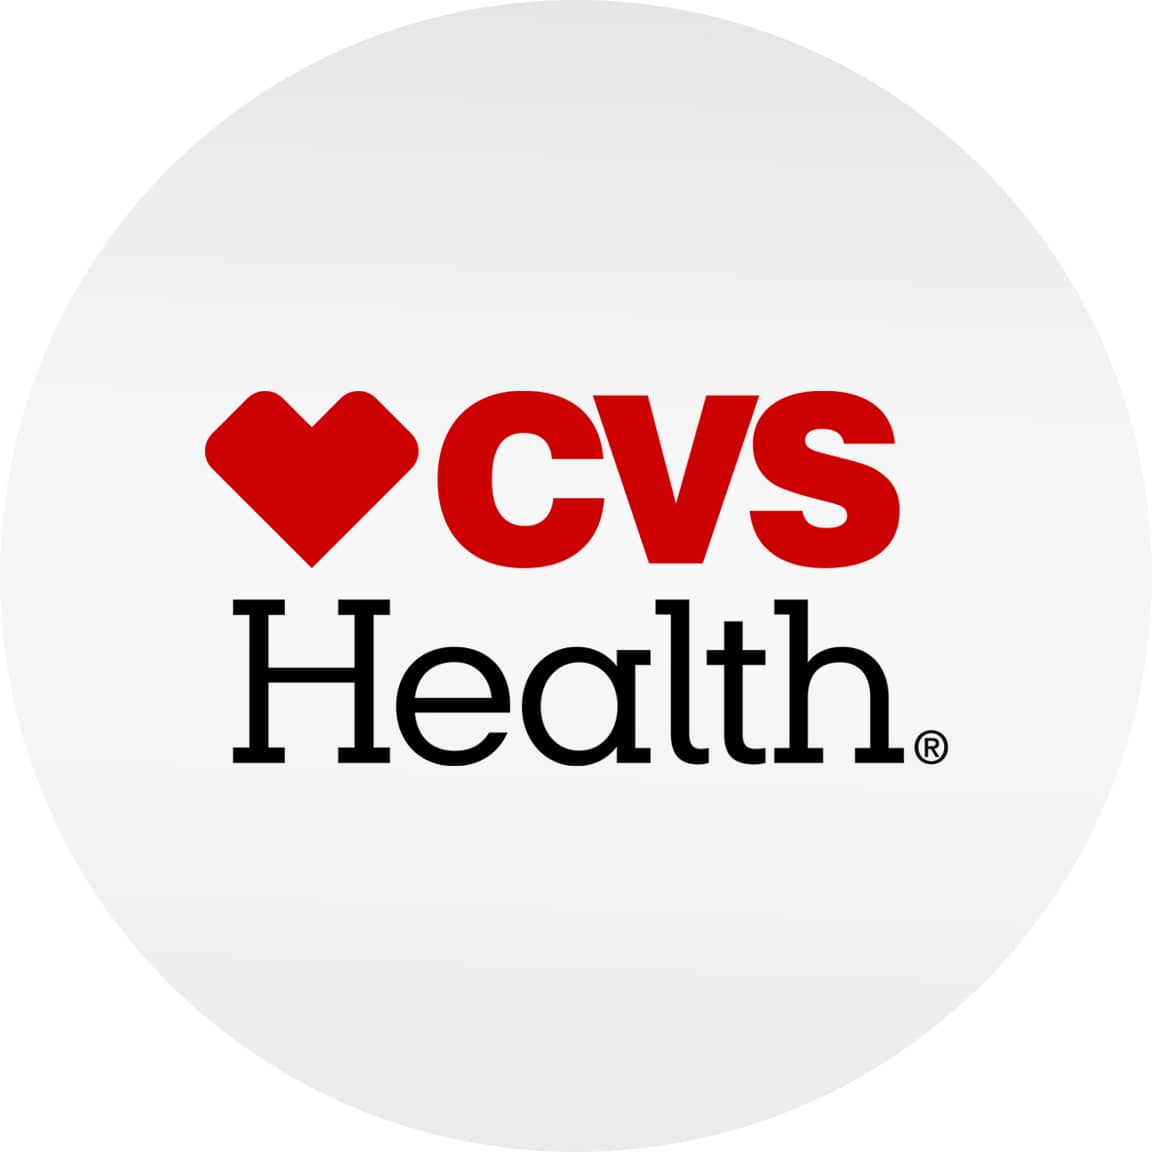 Shop for products from CVS Health®